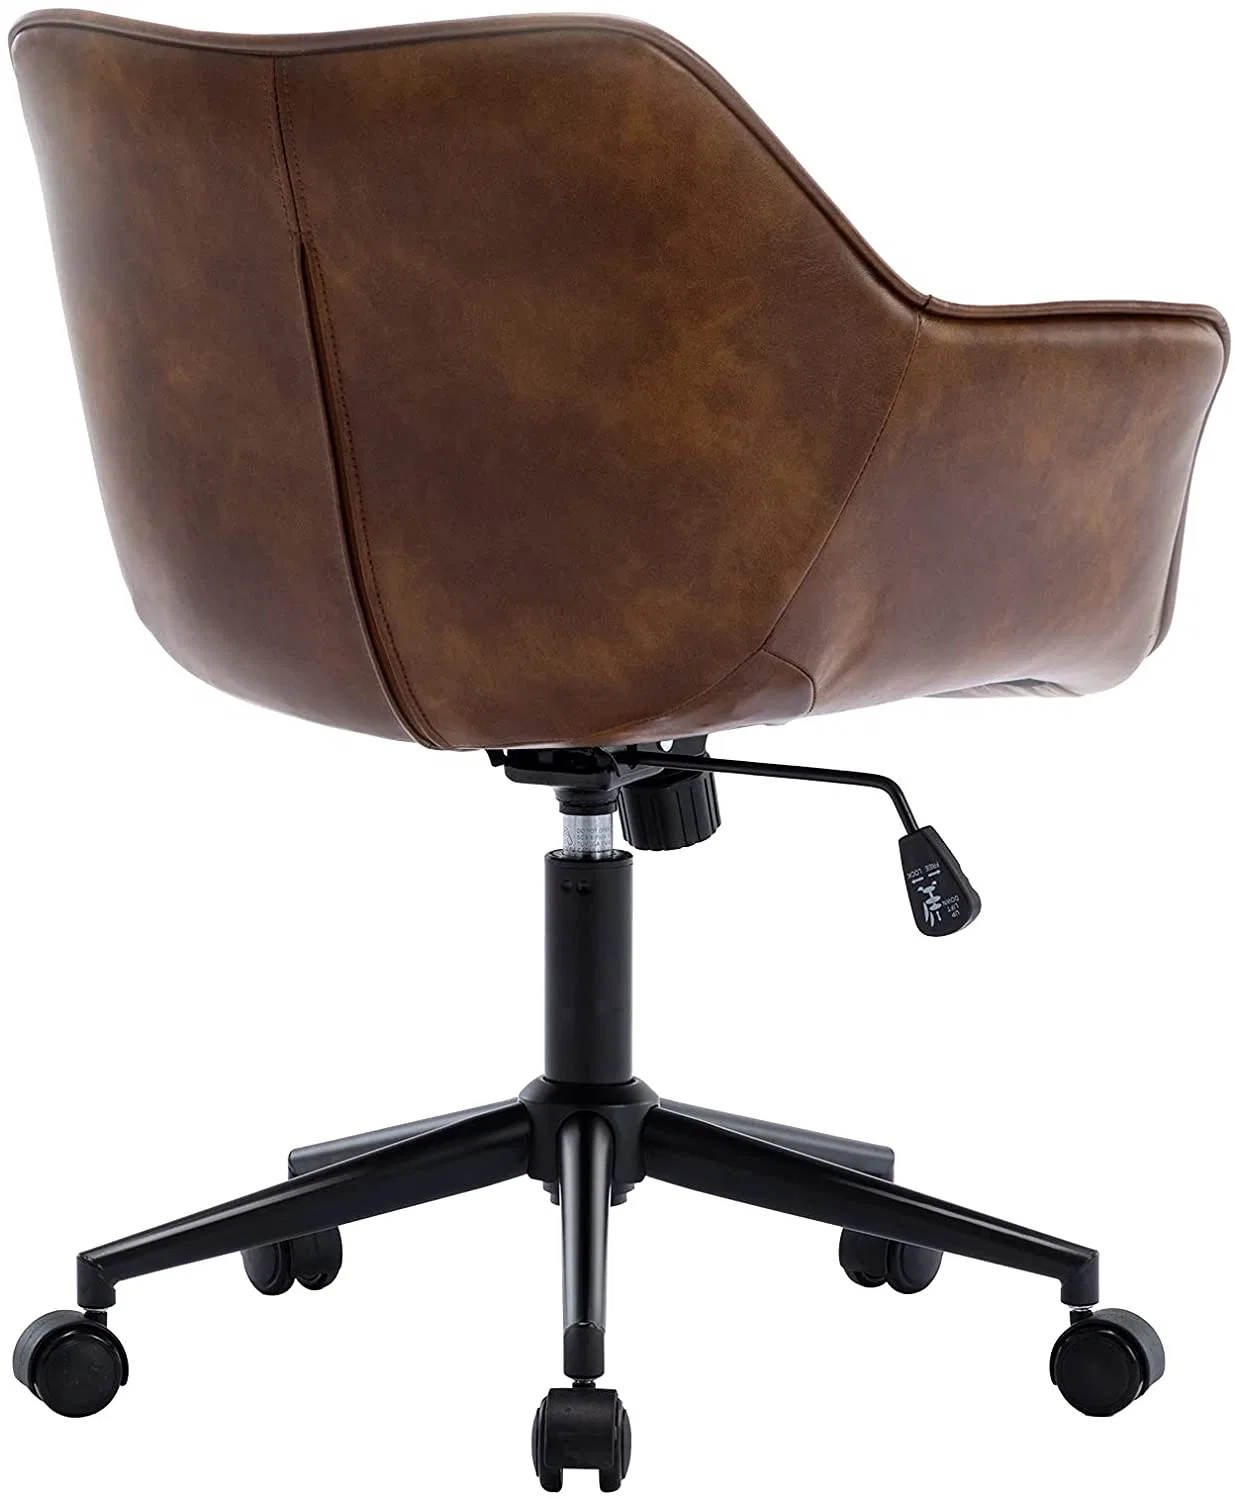 Lower Price Office Furniture Chair Swivel 200 Kgs Low Back Nordic Home Adjustable Computer Chairs Leather Office Chairhot Sale Products